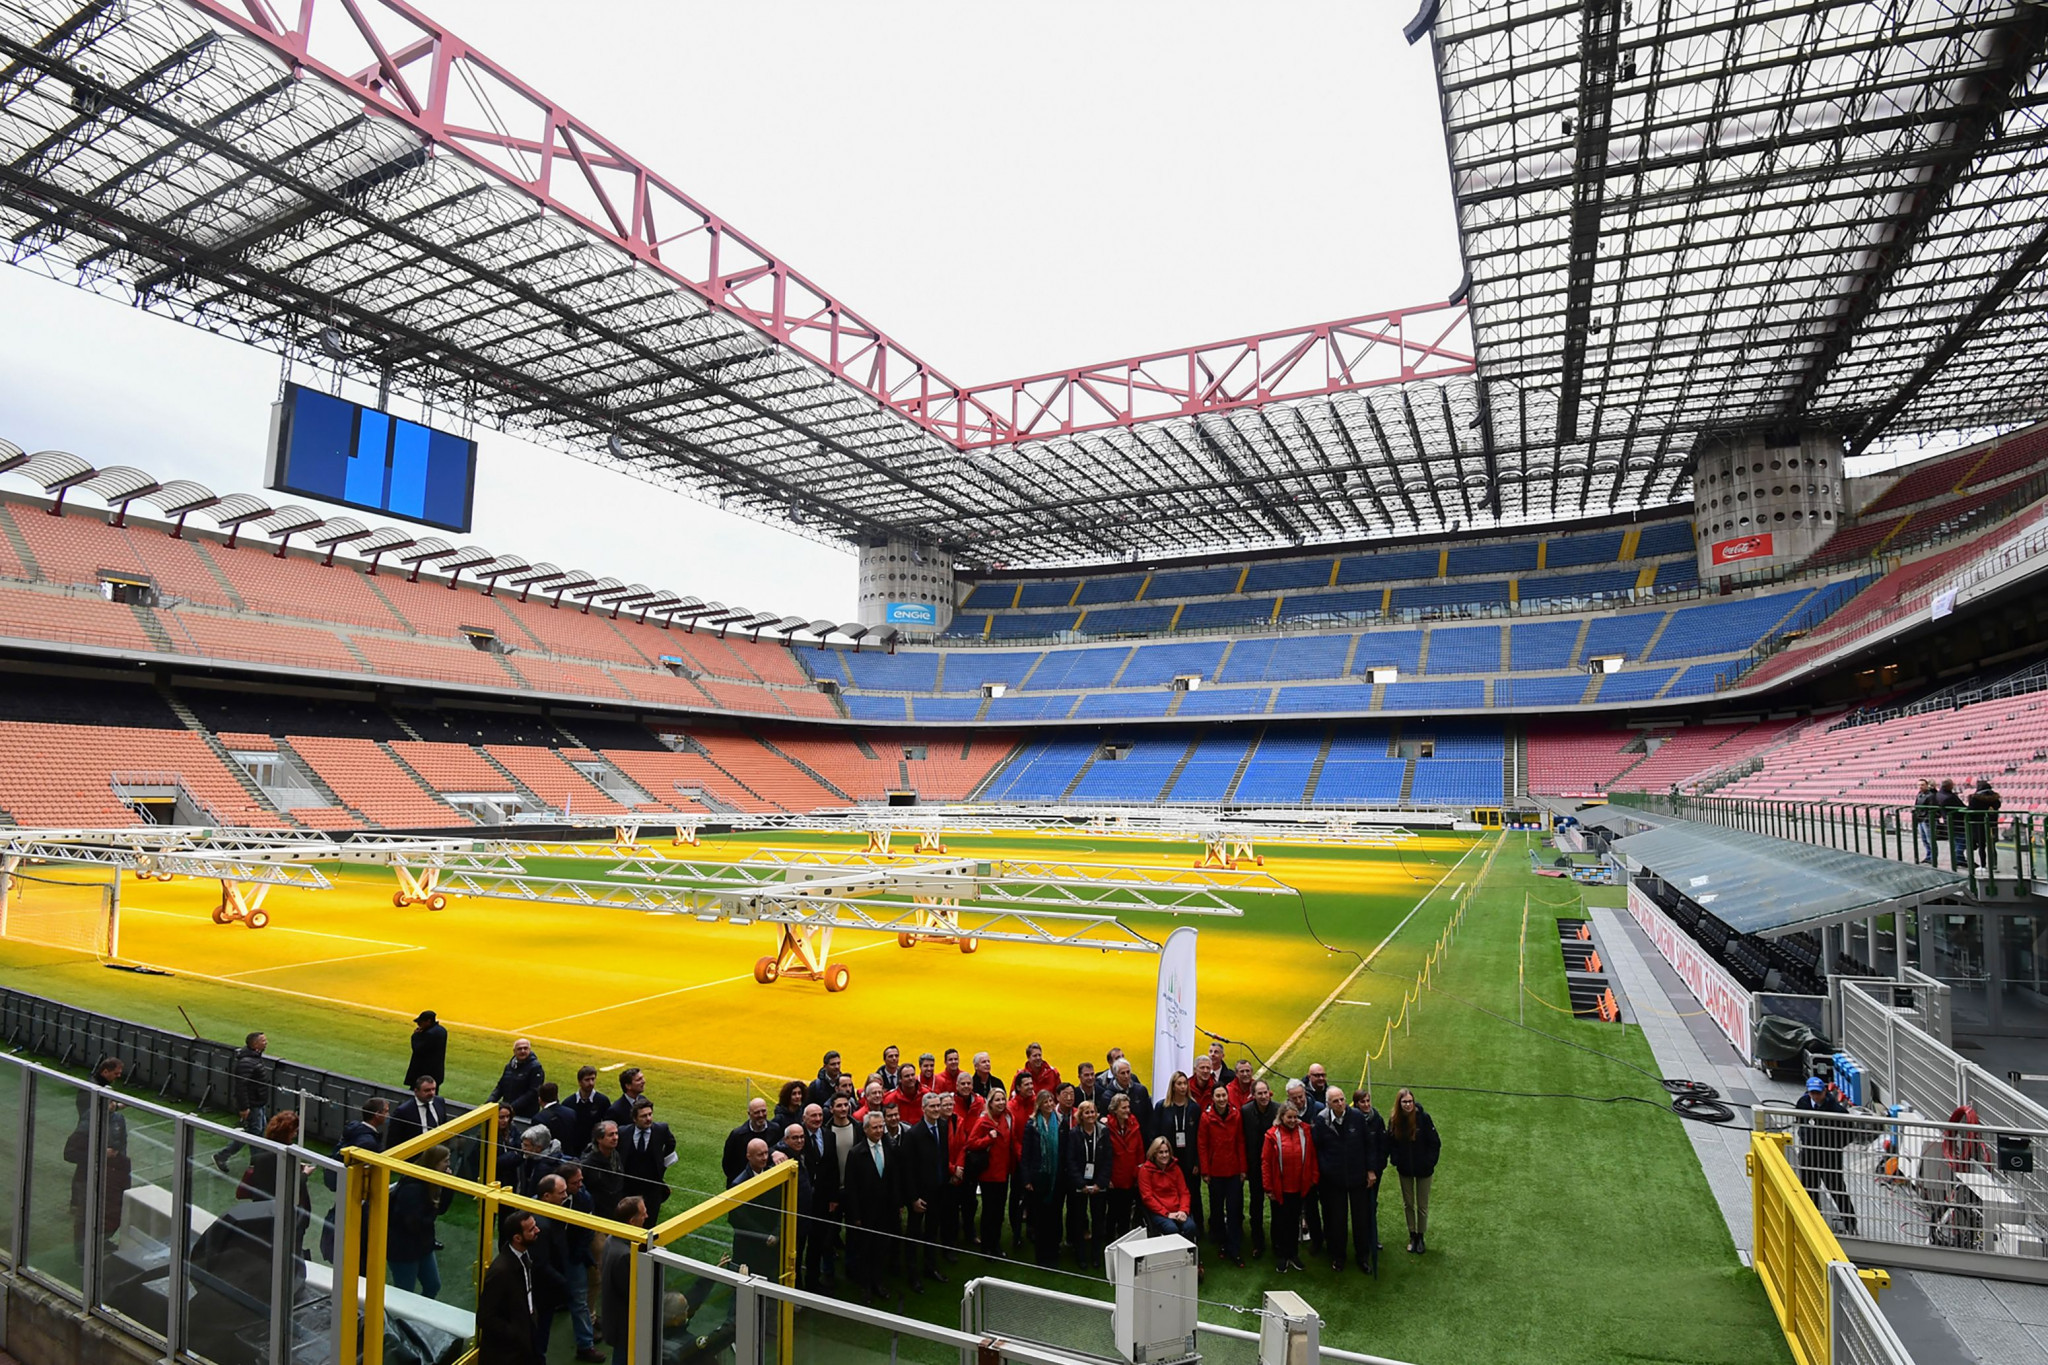 The San Siro is set to stage the Winter Olympics Opening Ceremony on February 6 2026 ©Getty Images